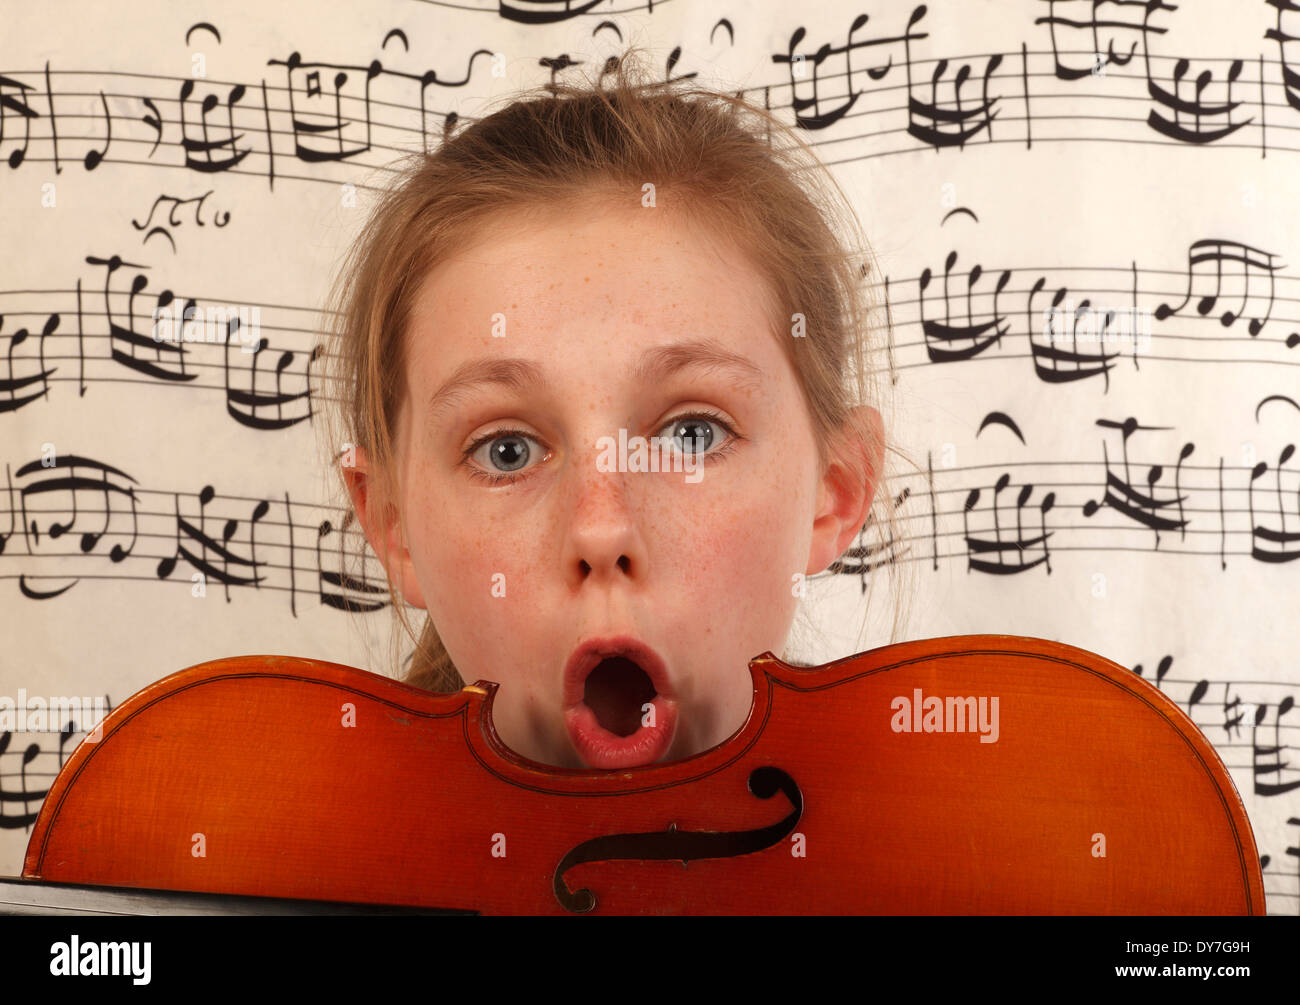 come and discover the world of music for children Stock Photo